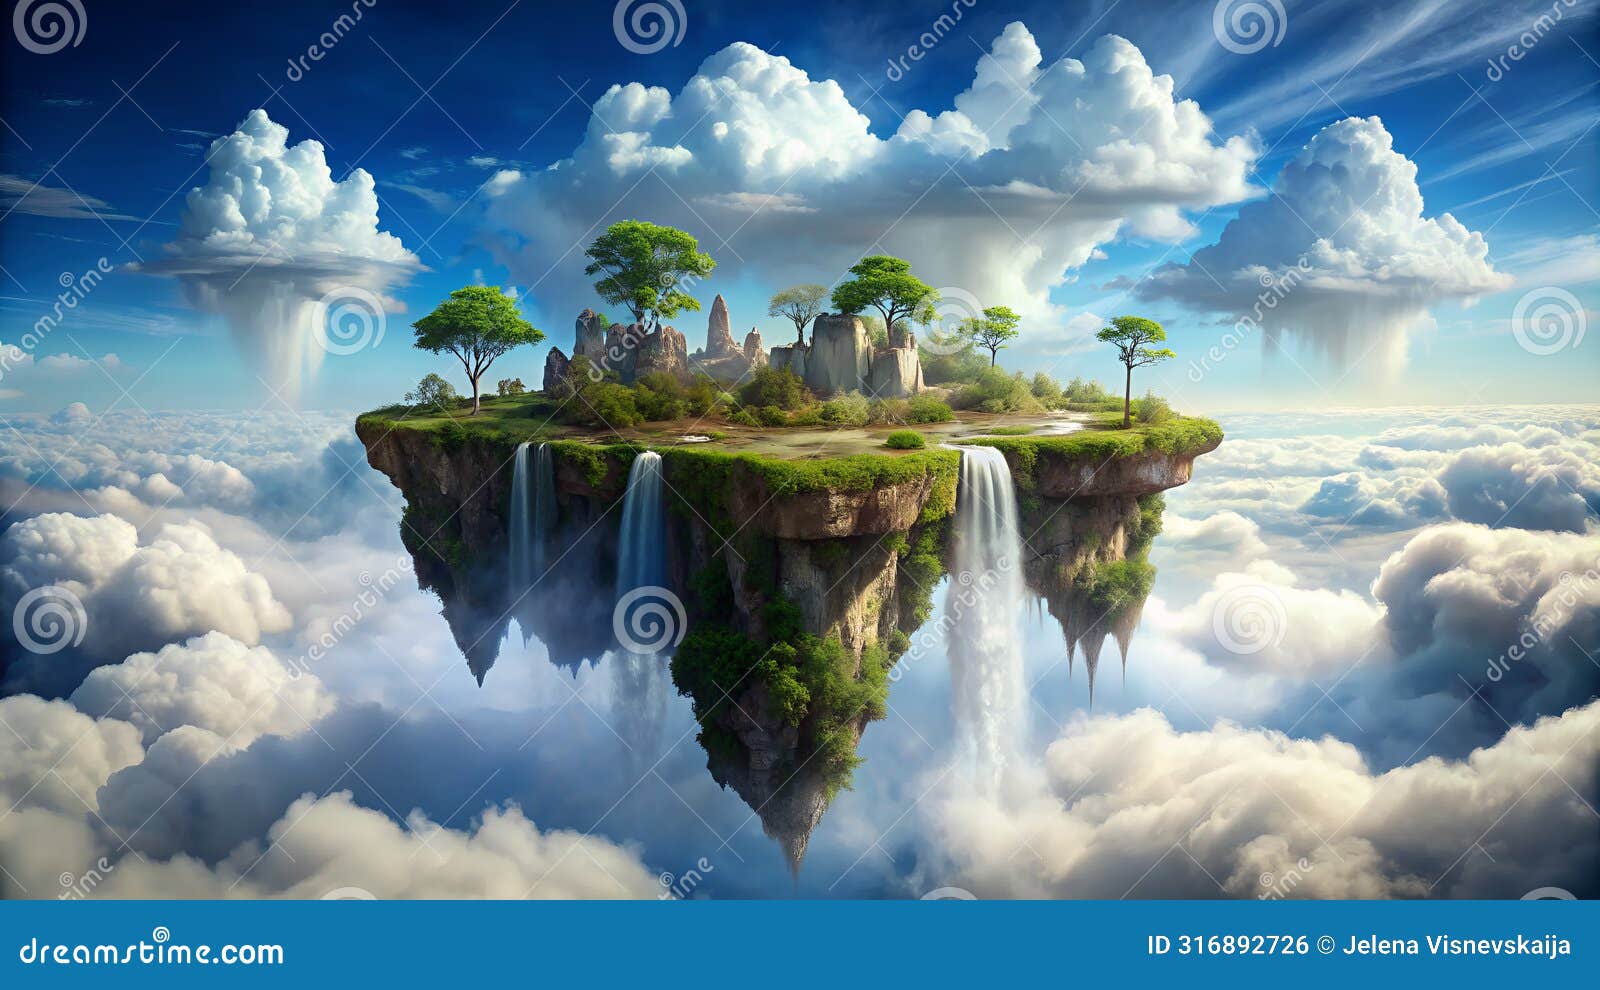 a treecovered floating island with a waterfall amidst the clouds